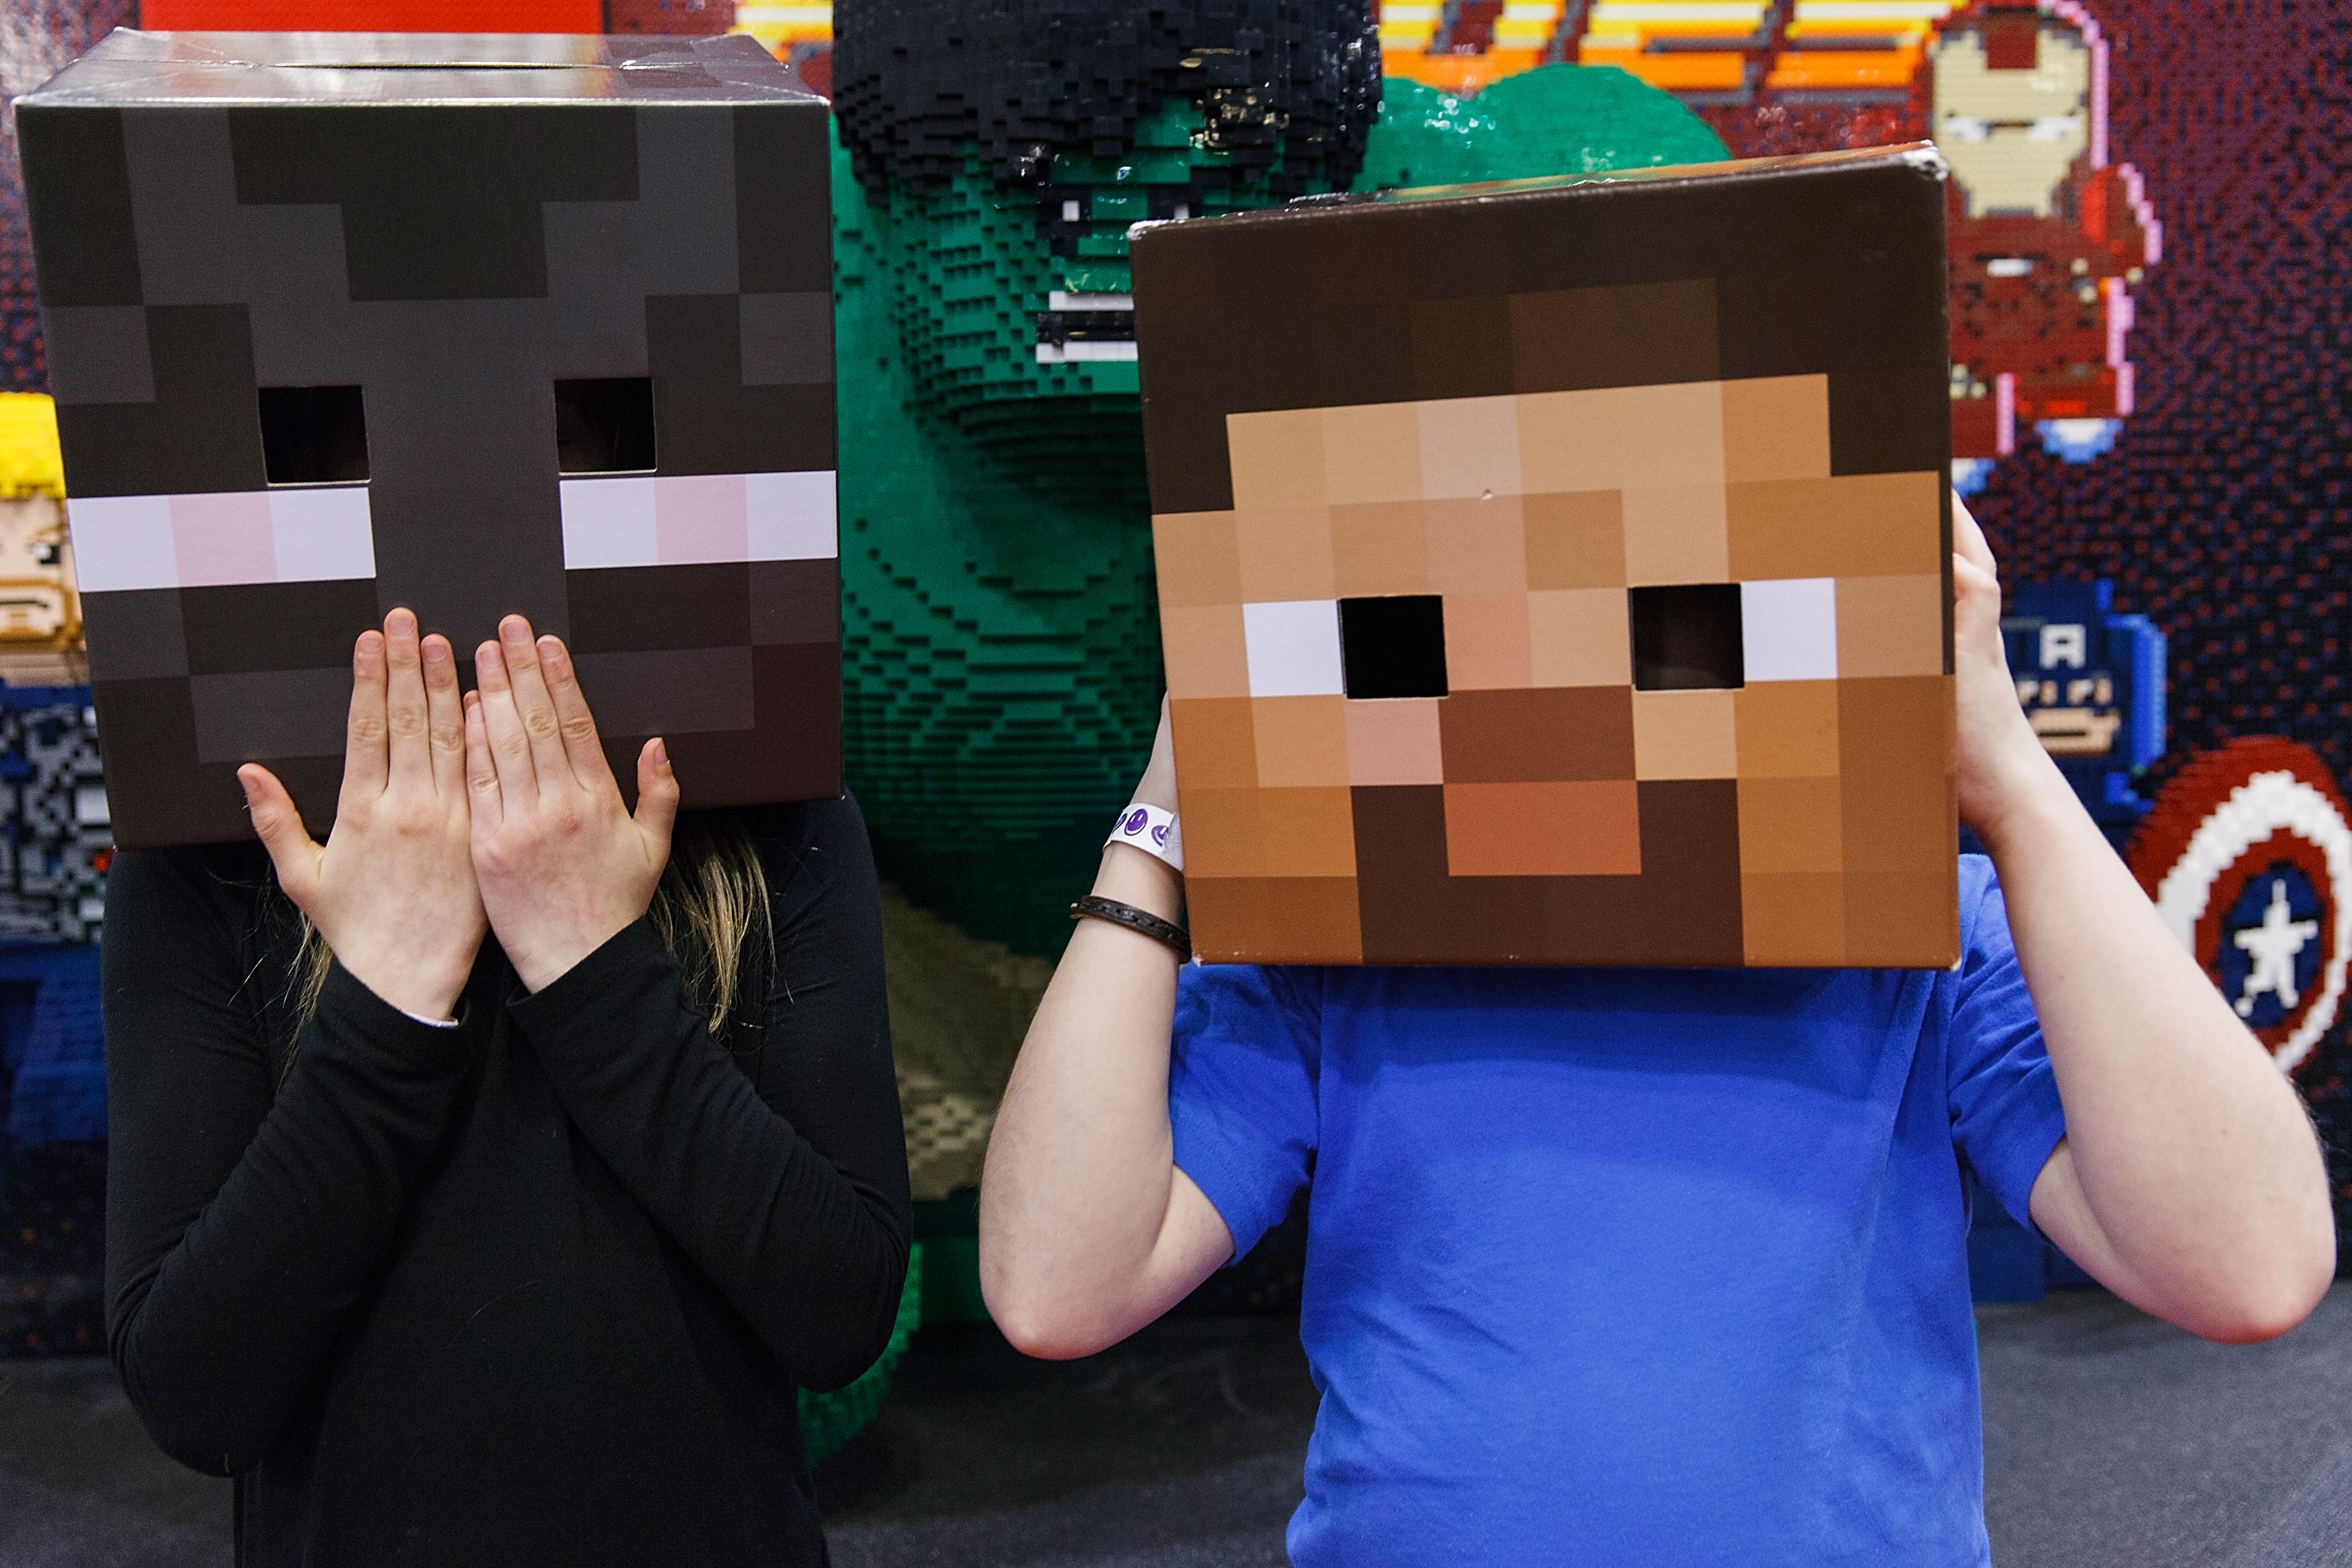 Minecraft fans during Fan Expo Vancouver 2015 at the Vancouver Convention Centre on April 3, 2015 in Vancouver, Canada. (Andrew Chin&mdash;2015 Andrew Chin)